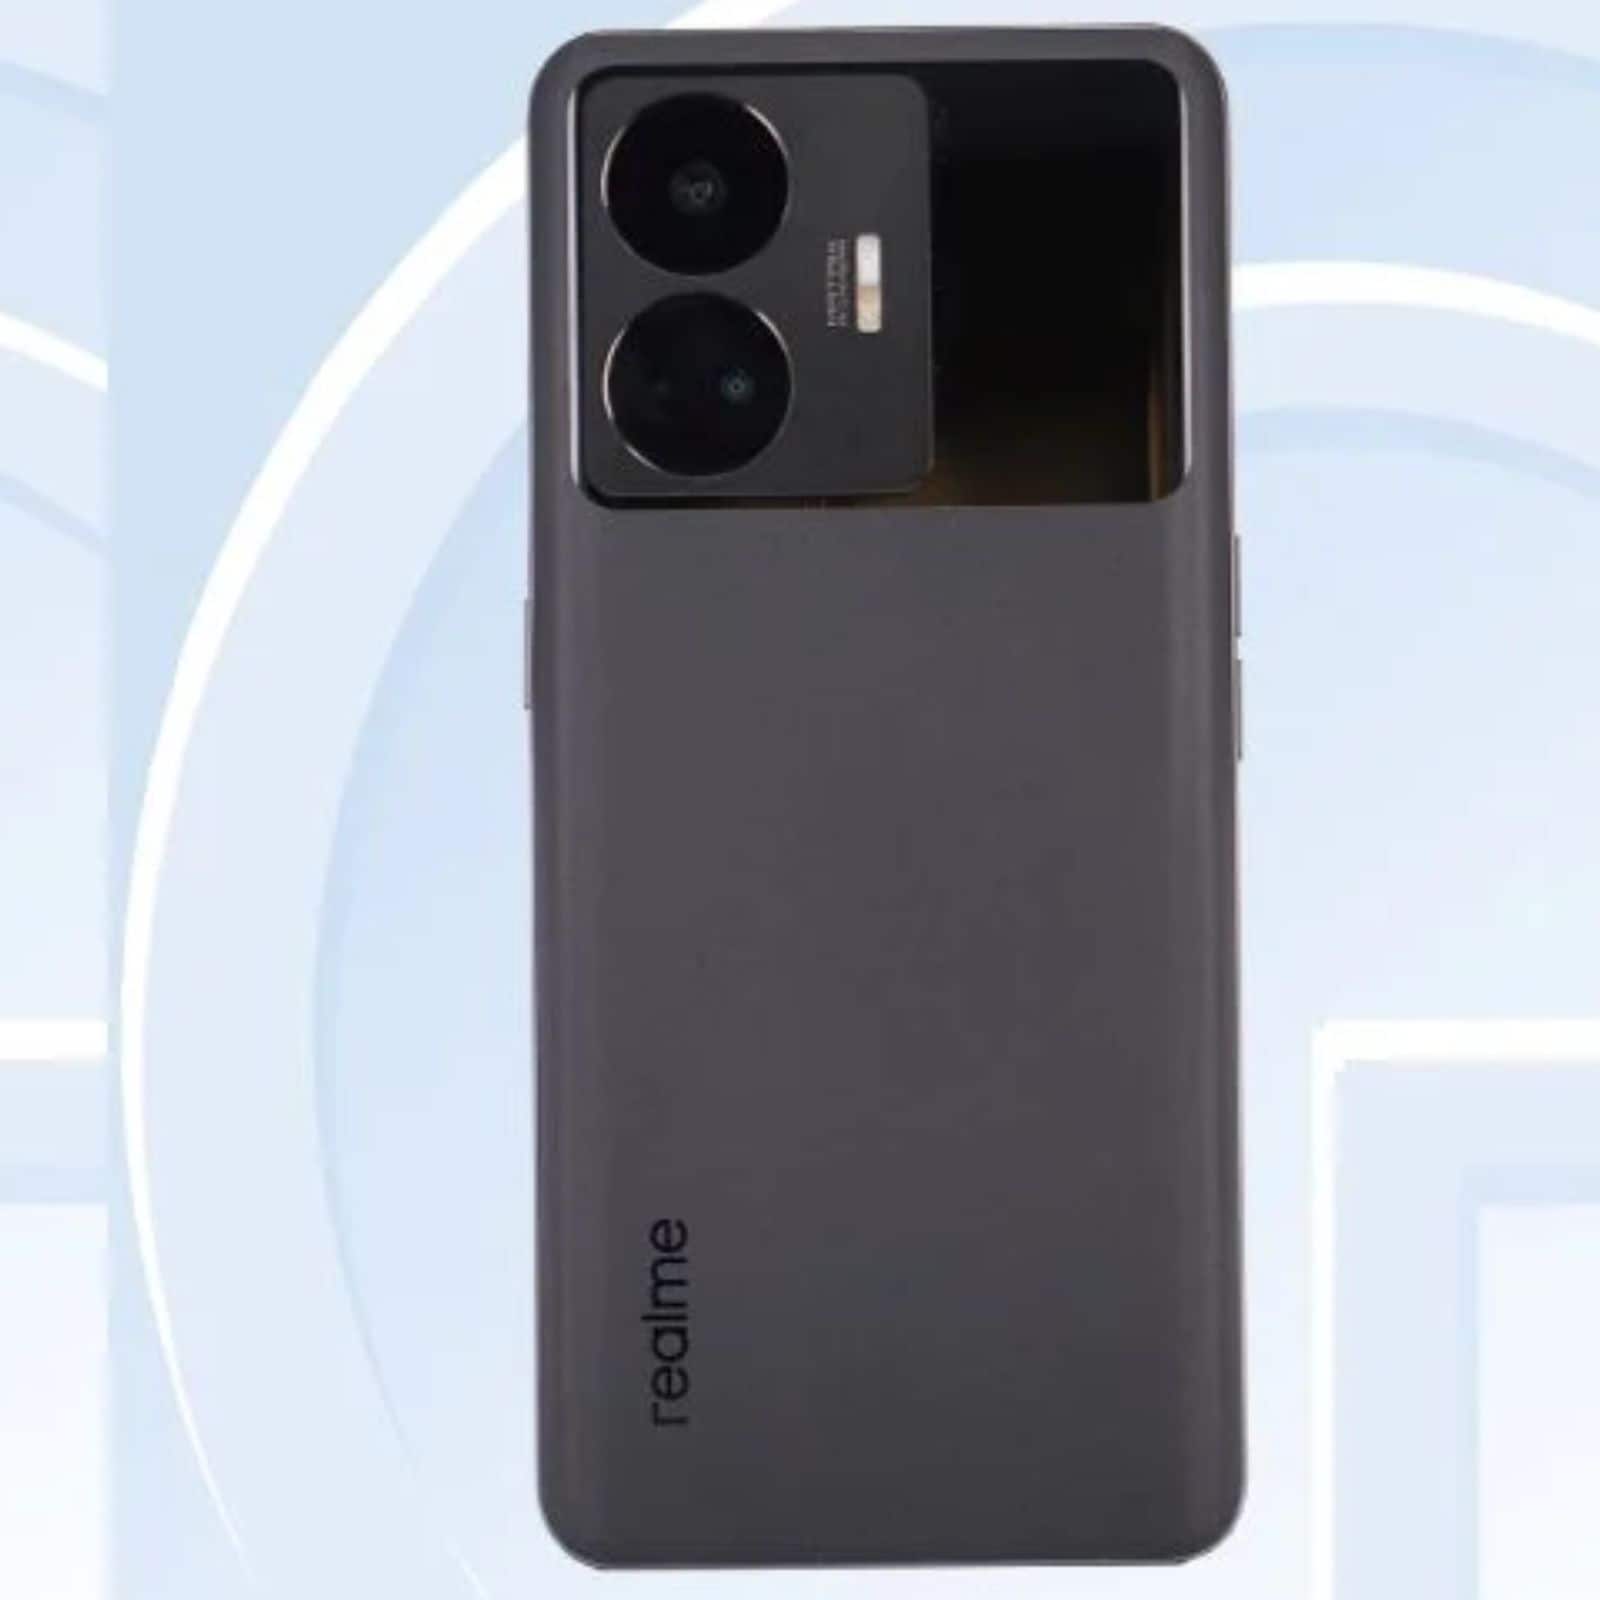 realme GT Neo6 to Launch as realme GT5 Globally, New Report Claims